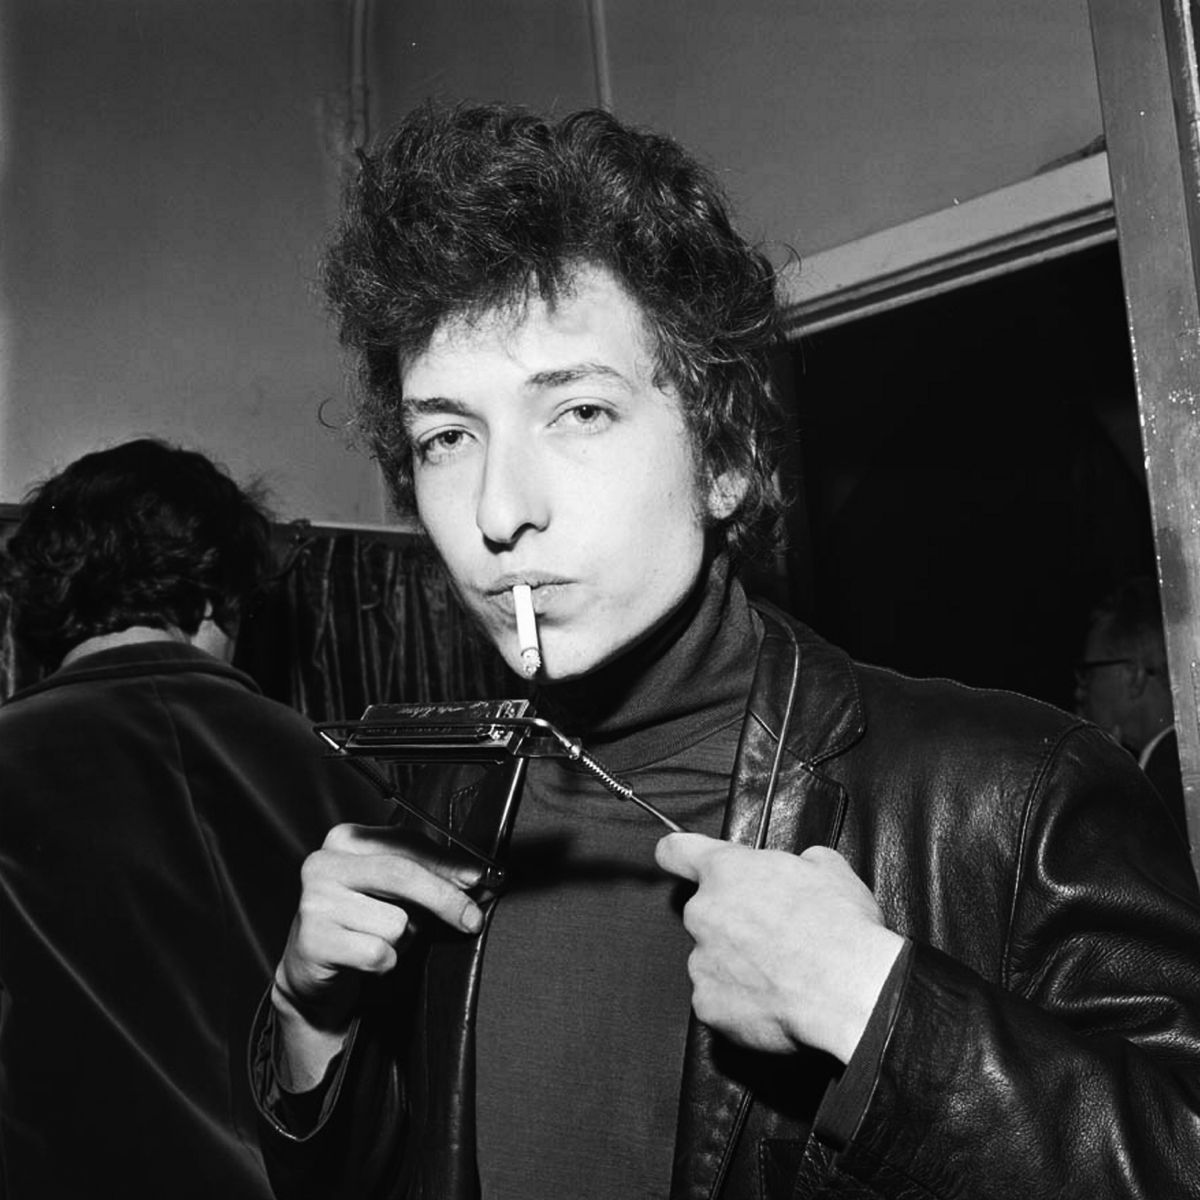 Bob Dylan Sued for Alleged Sexual Abuse of Minor in 1965